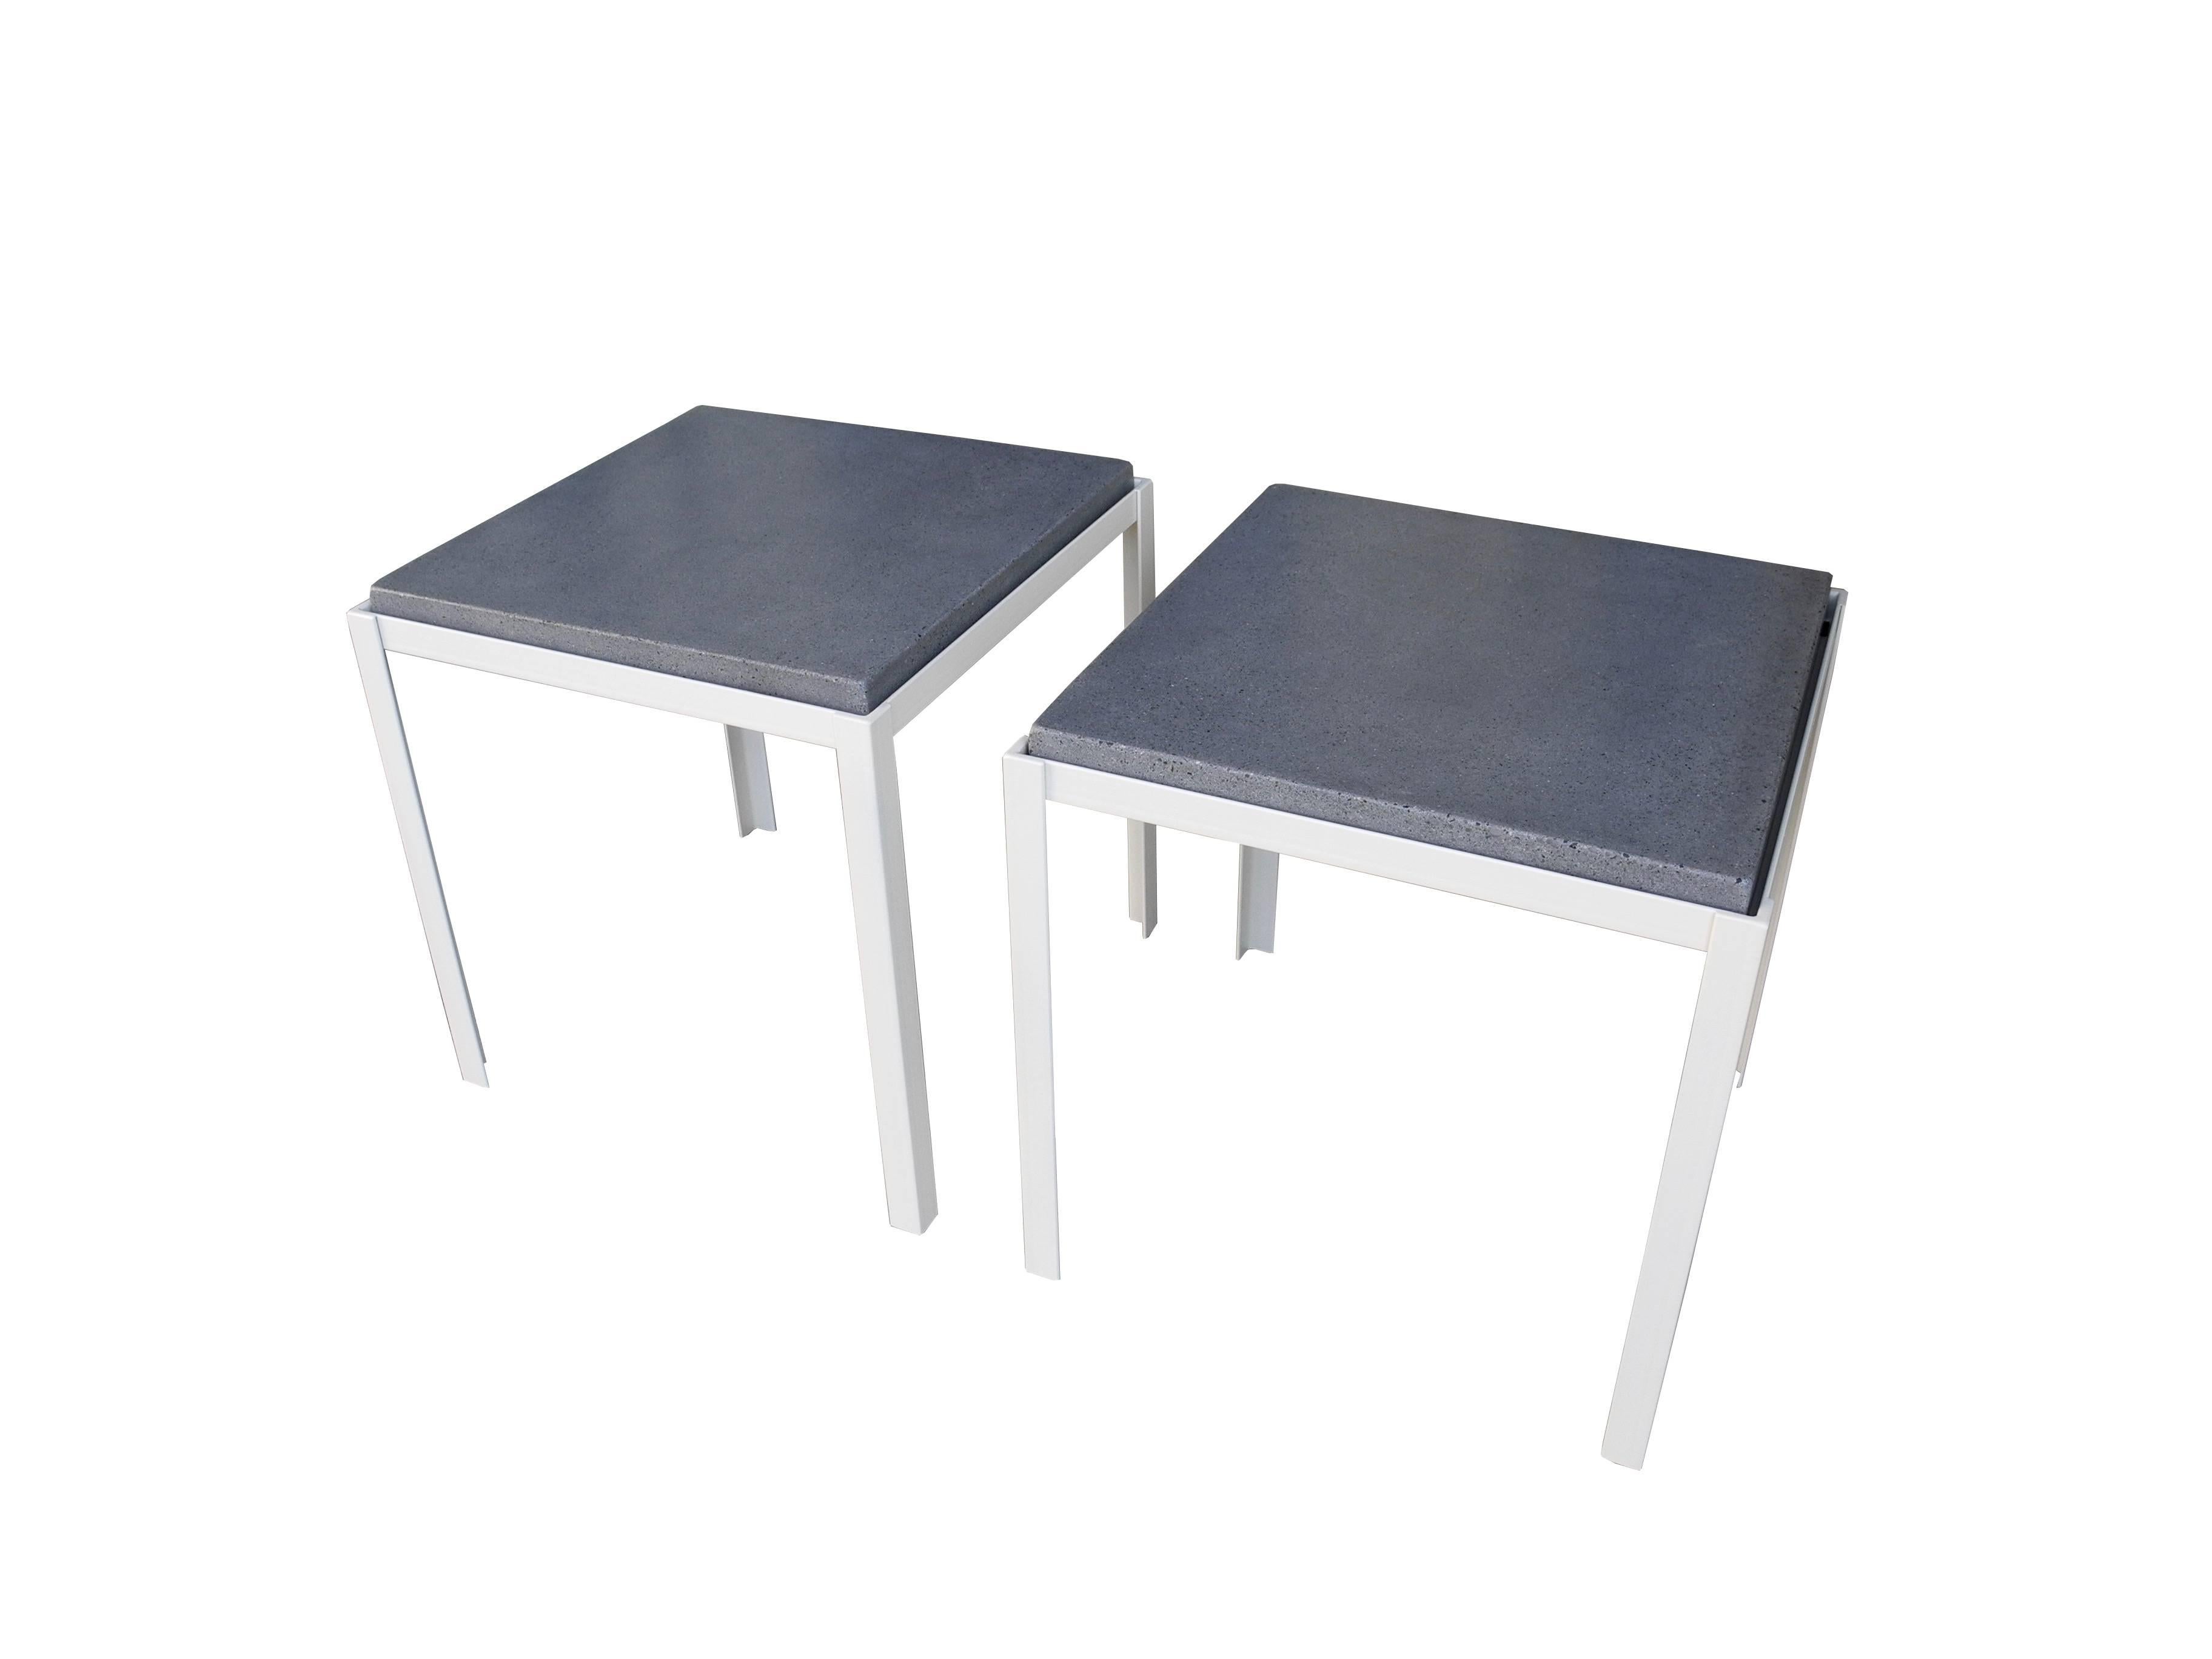 Polished Concrete and Welded Steel Night Stands, Coffee Tables, Corinne Robbins (Moderne) im Angebot